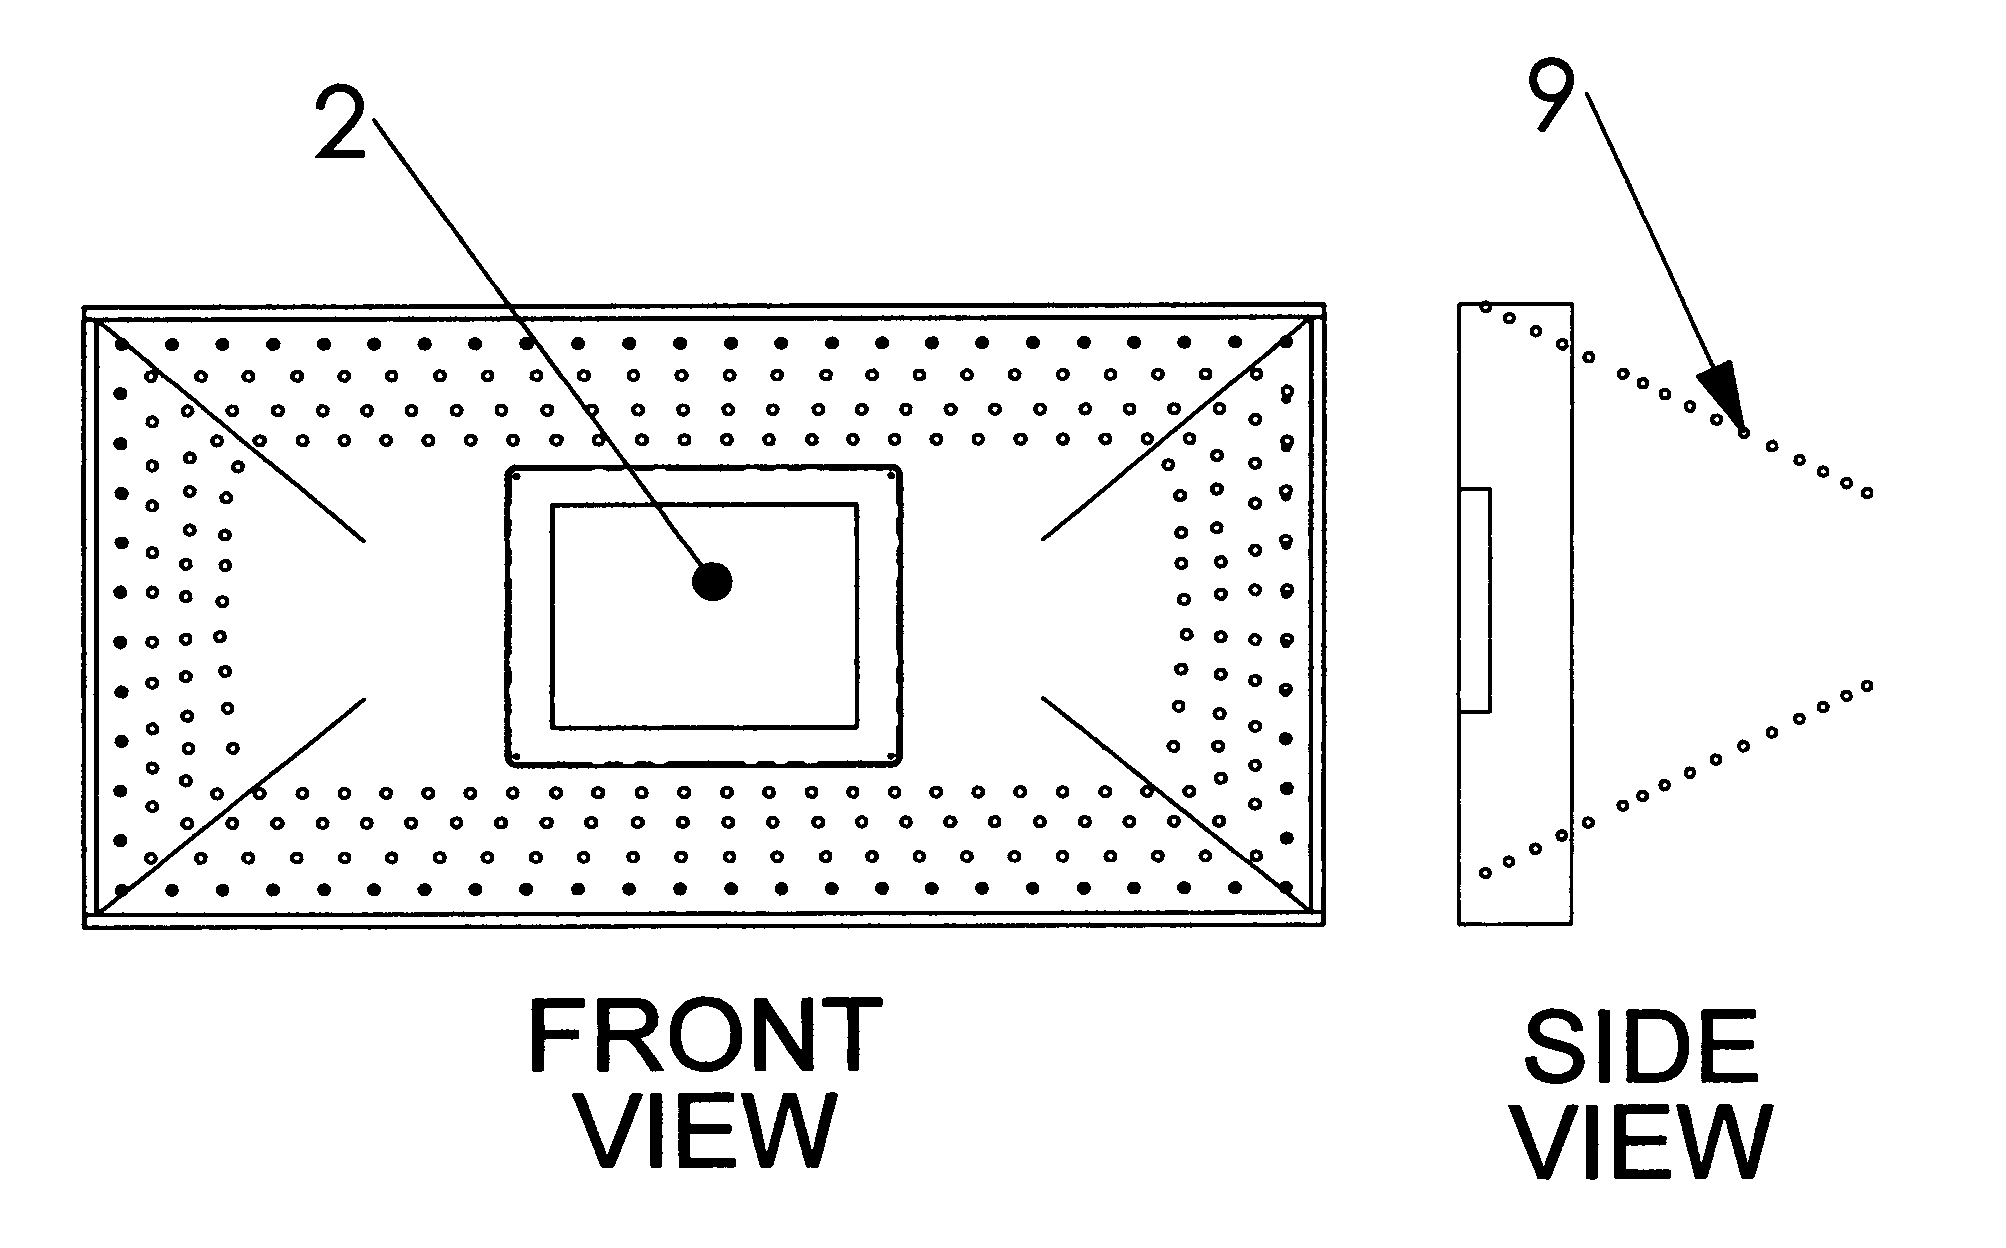 Infinity tunnel display system with floating dynamic image